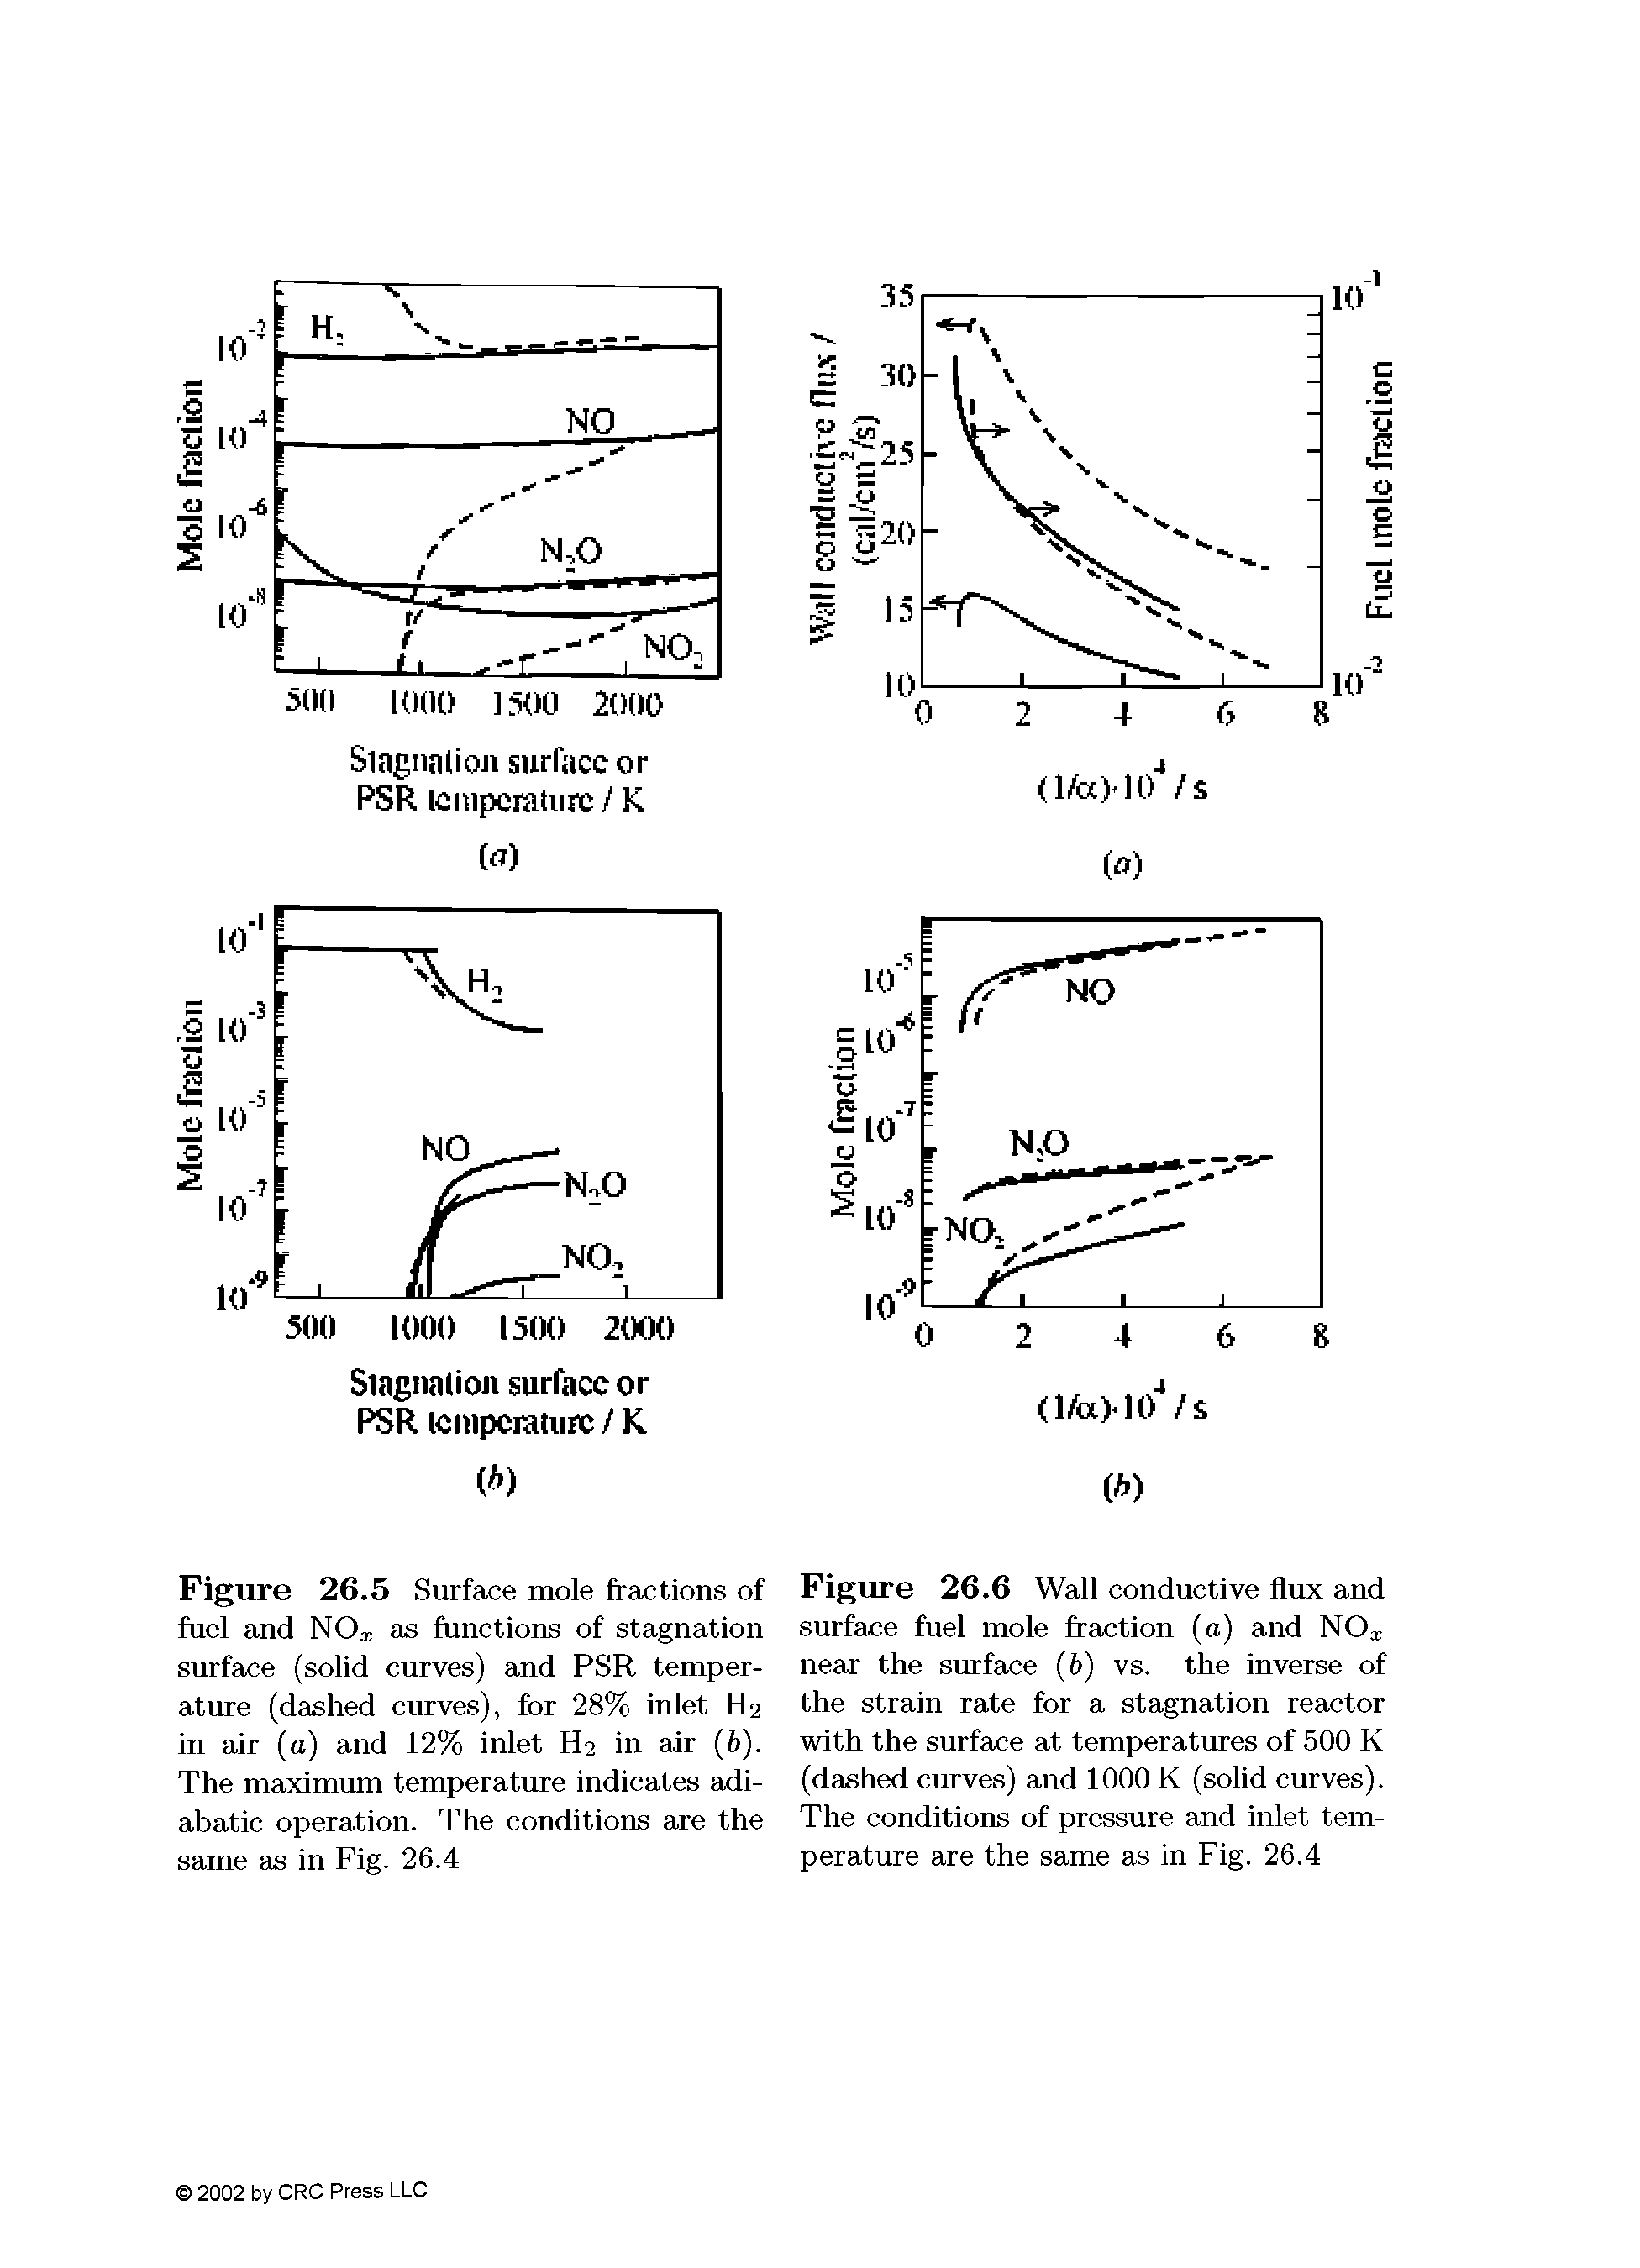 Figure 26.5 Surface mole fractions of fuel and NO as functions of stagnation surface (solid curves) and PSR temper-atirre (dashed curves), for 28% inlet H2 in air (a) and 12% inlet H2 in air (b). The maximum temperature indicates adiabatic operation. The conditions are the same as in Fig. 26.4...